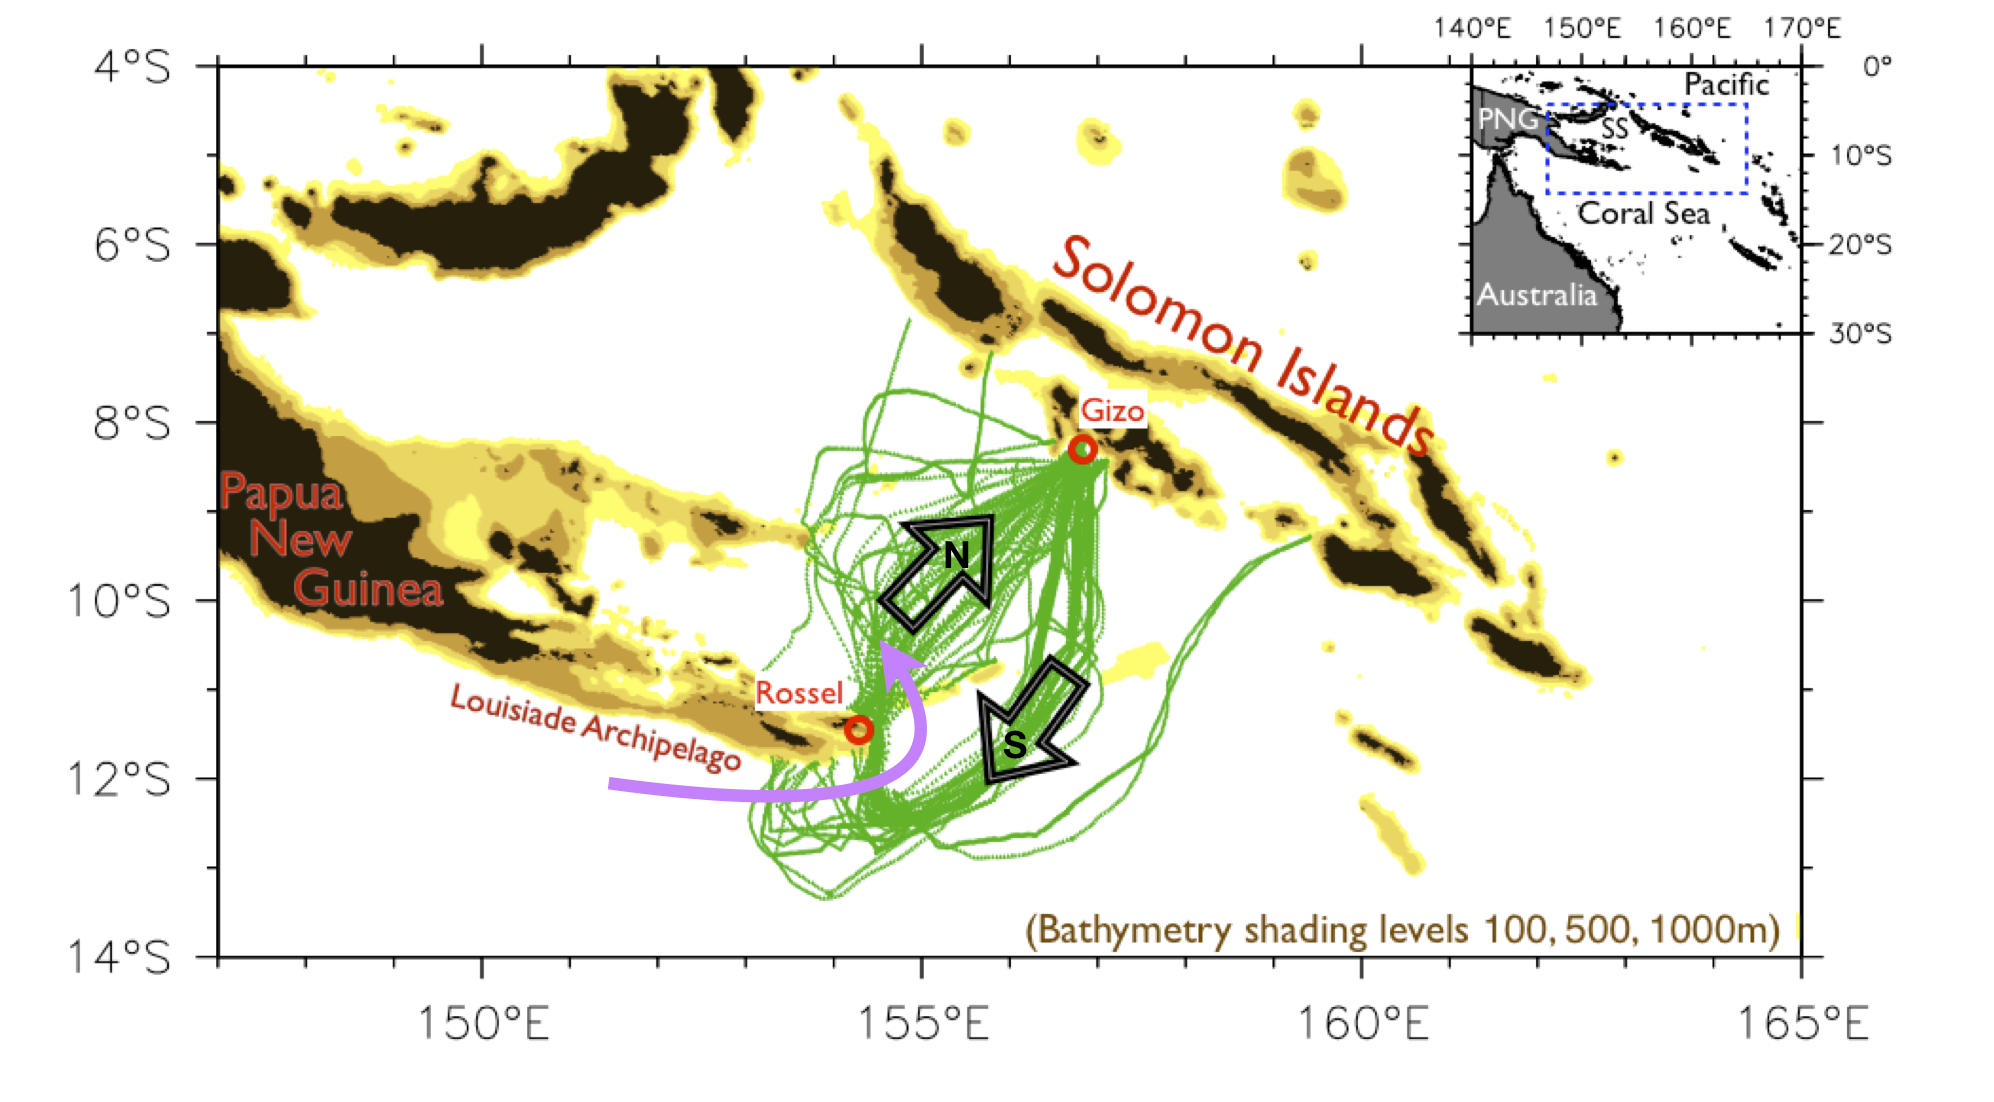 Bathymetric map of the Solomon Sea showing the near-continuous shallow reefs on Solomon Island side